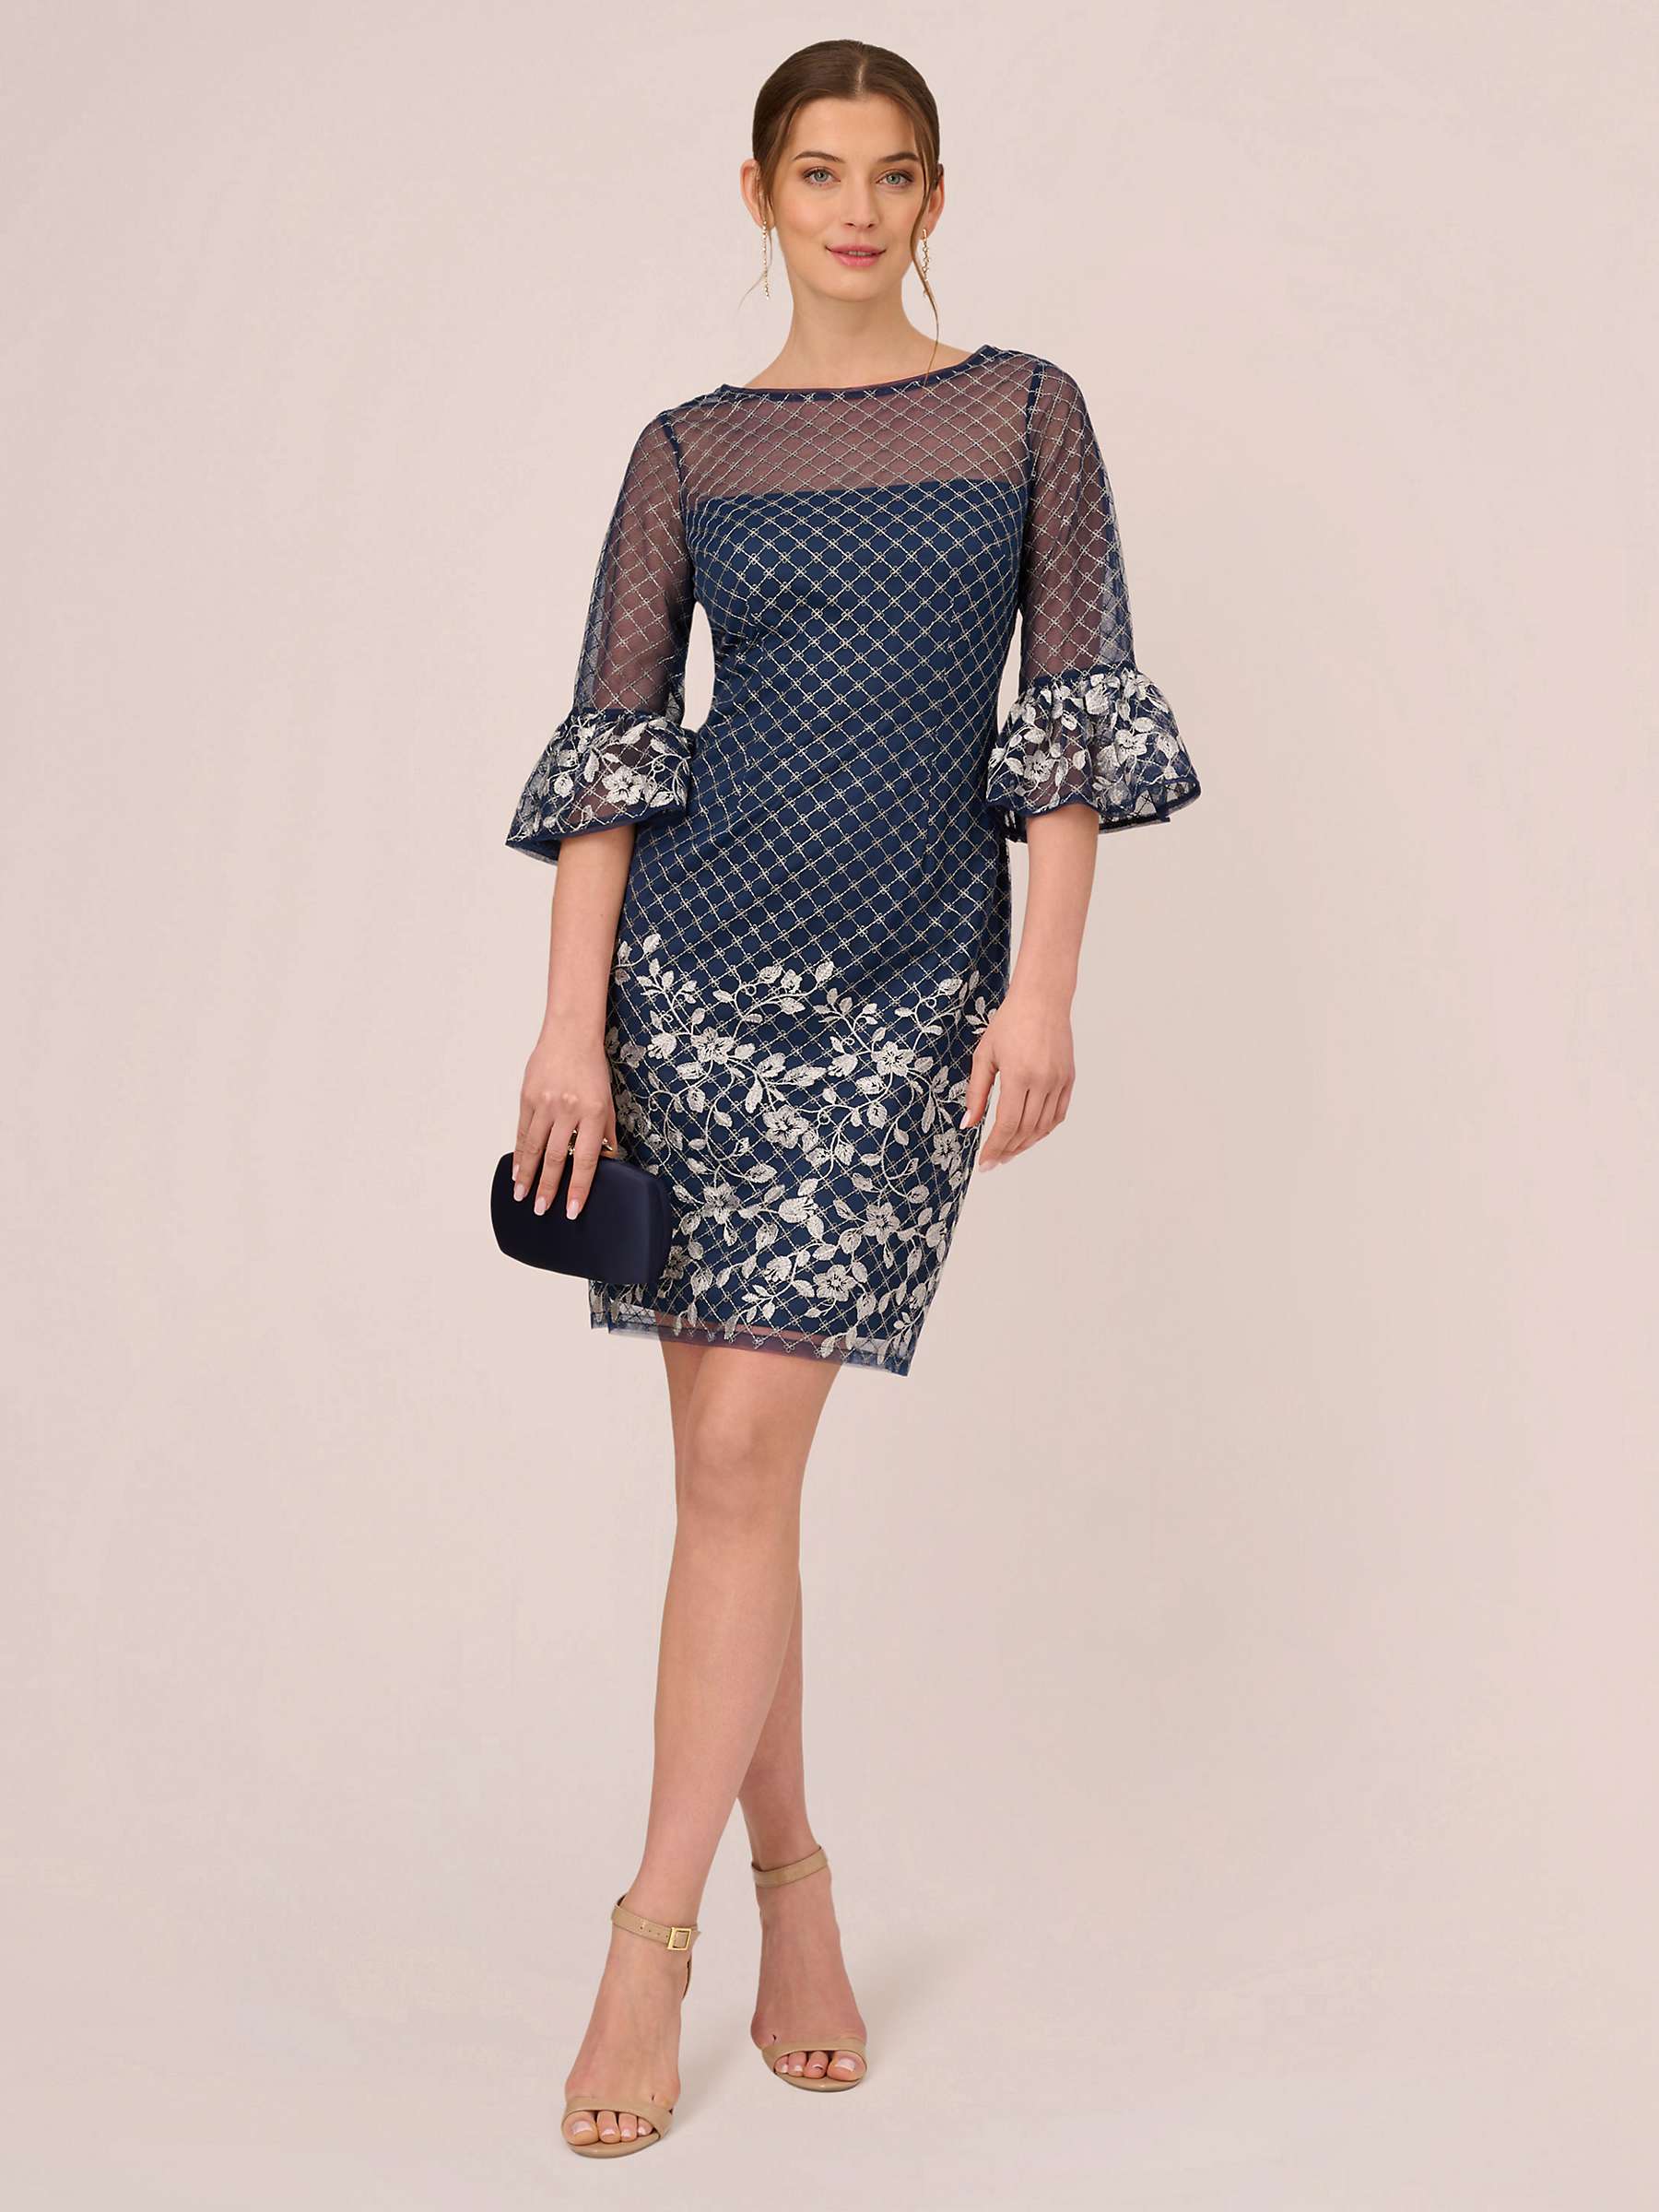 Buy Adrianna Papell Floral Embroidery Border Dress, Navy/Ivory Online at johnlewis.com